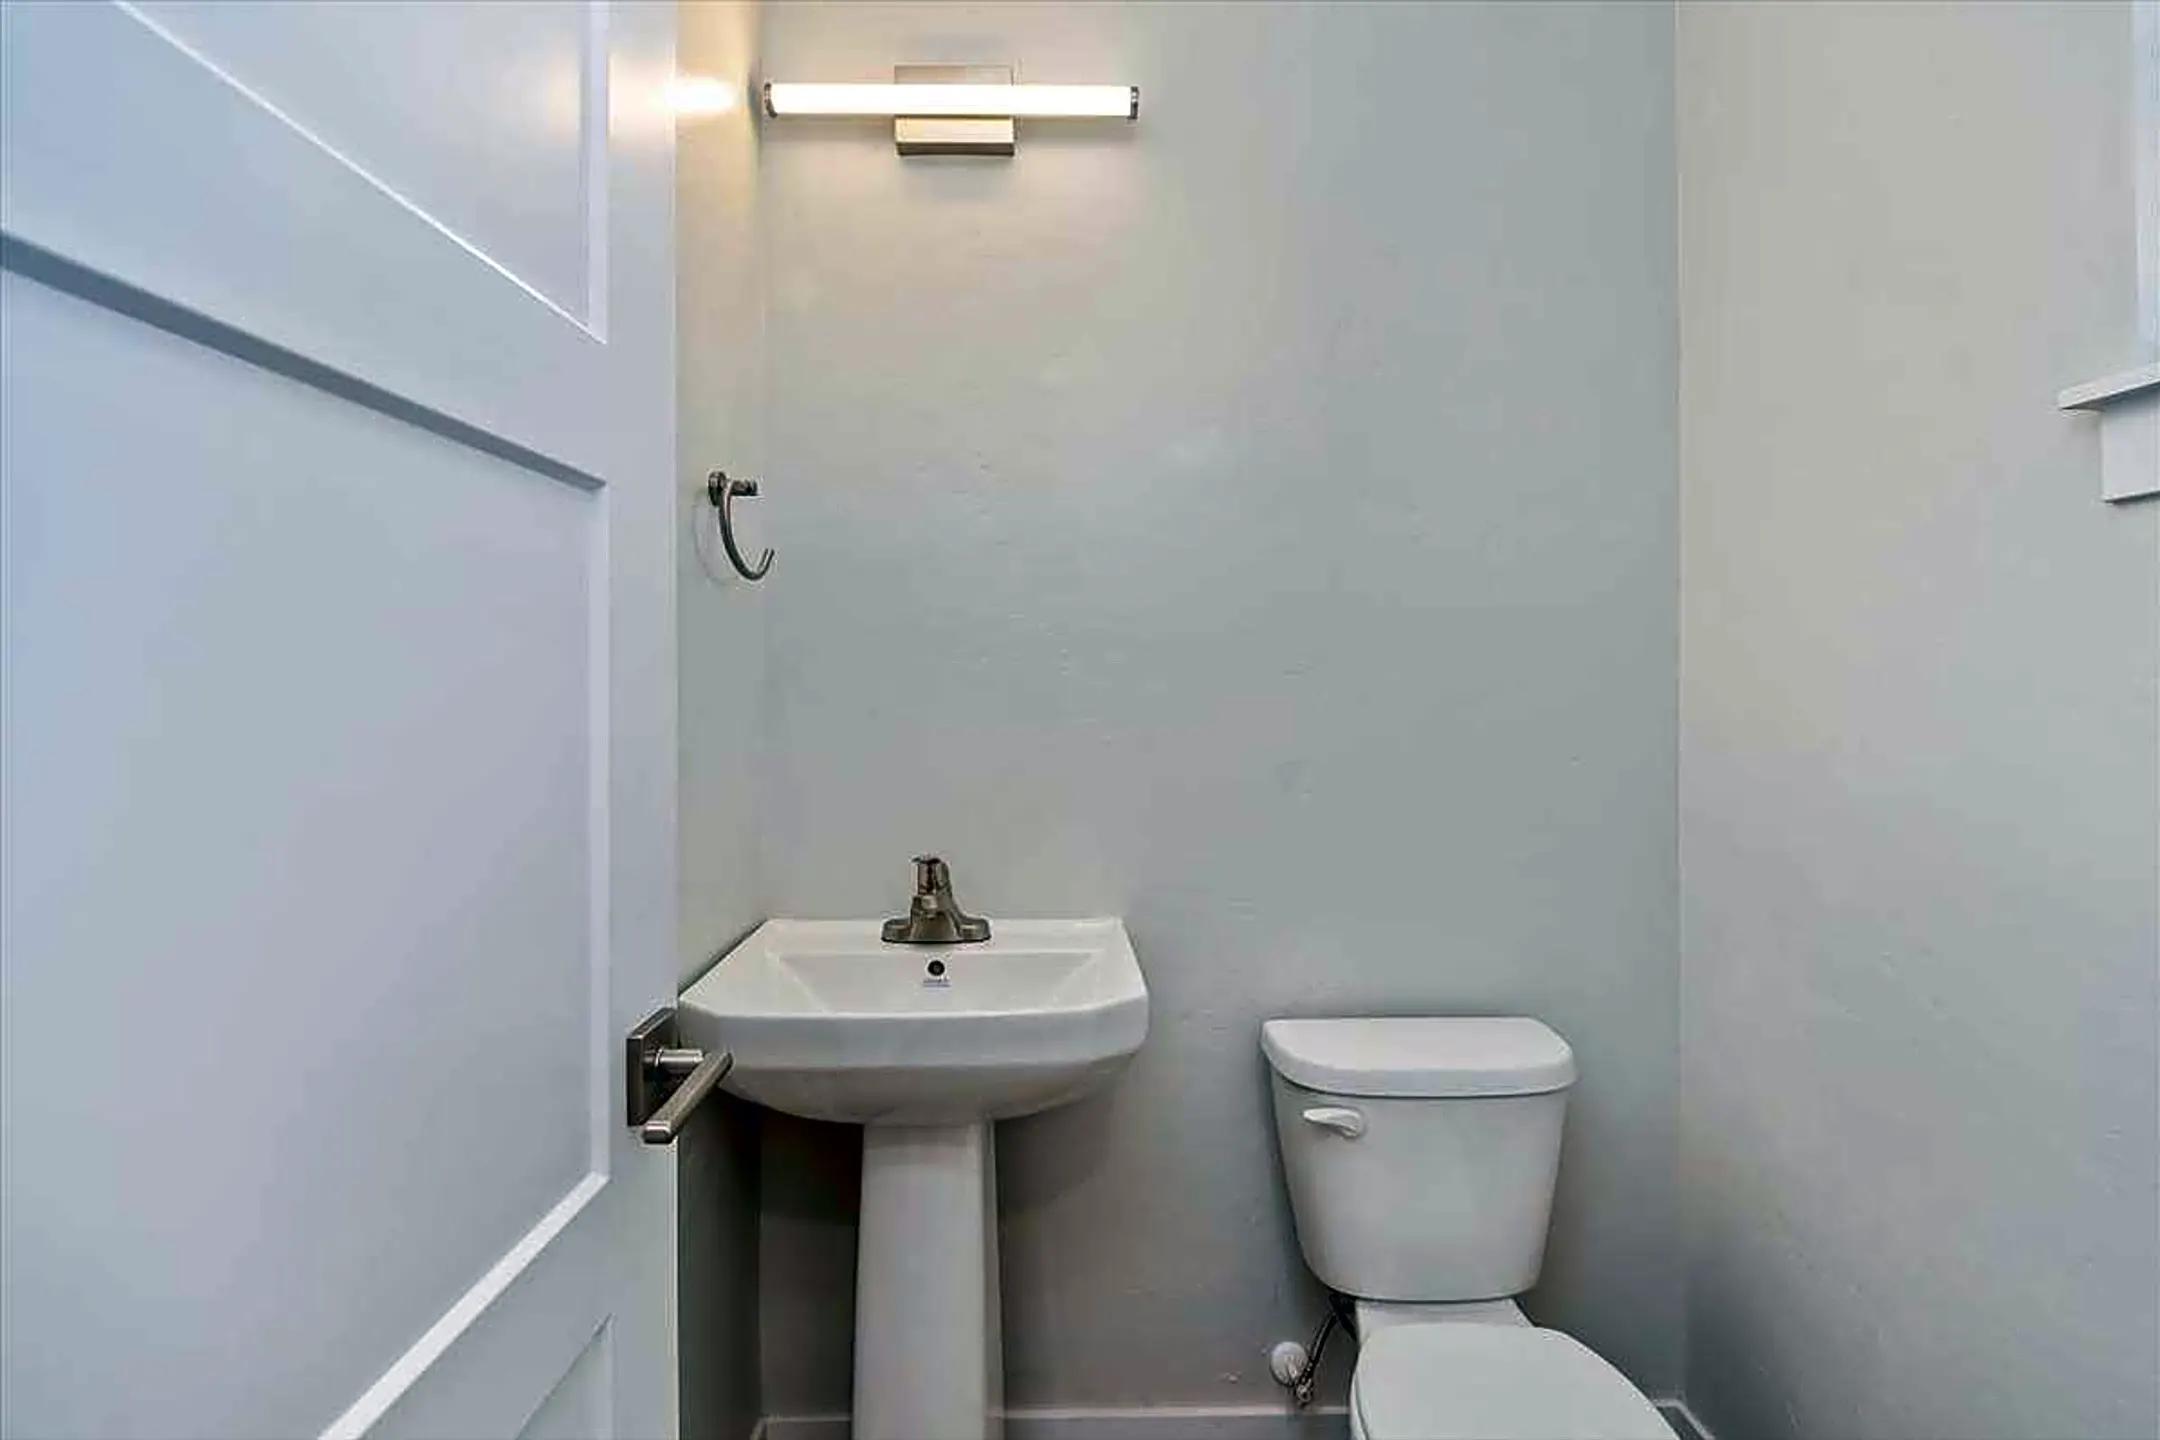 Bathroom - Townhomes At The Silo - Boise, ID